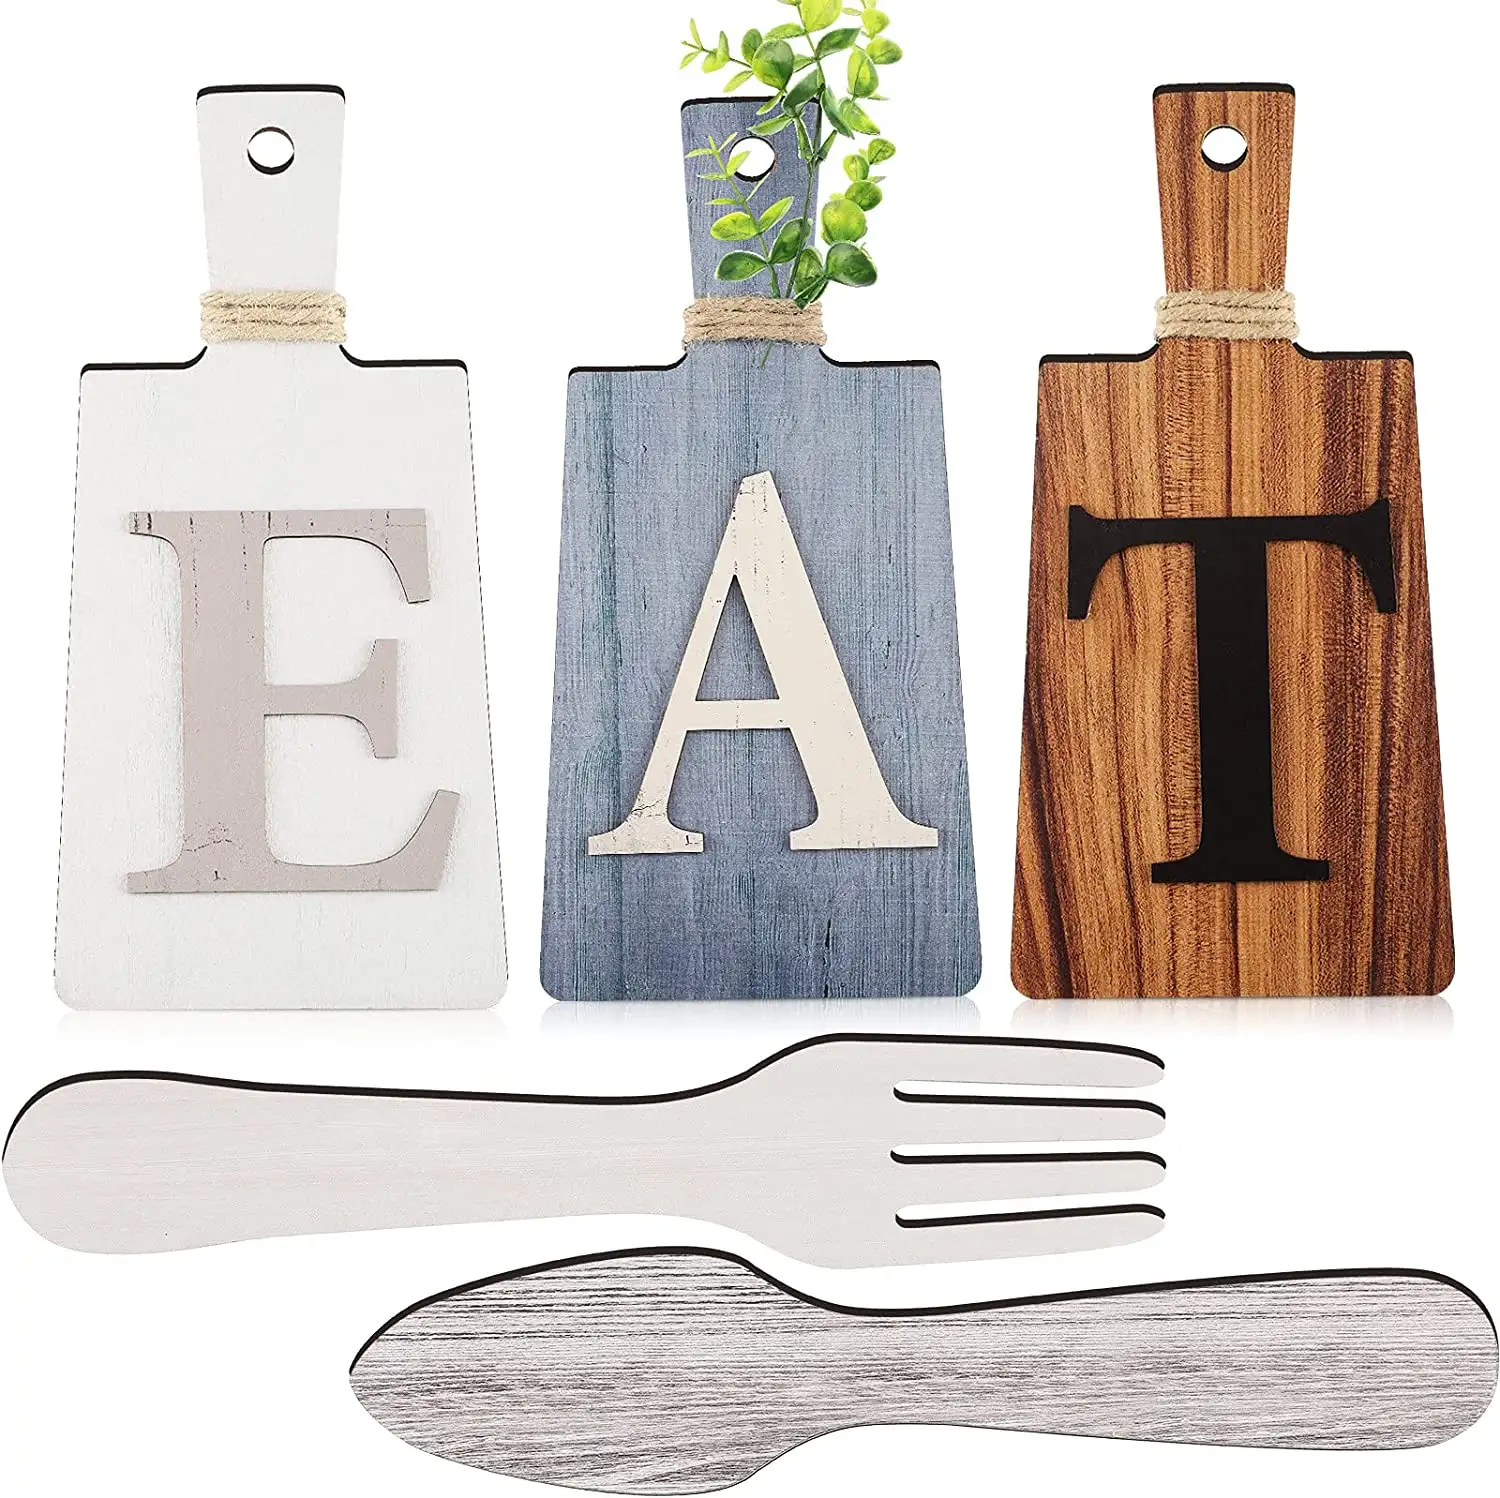 Caoxian Huashen Cutting Board Hanging Art Kitchen Eat Sign Fork and Spoon Wall wood crafts home decor